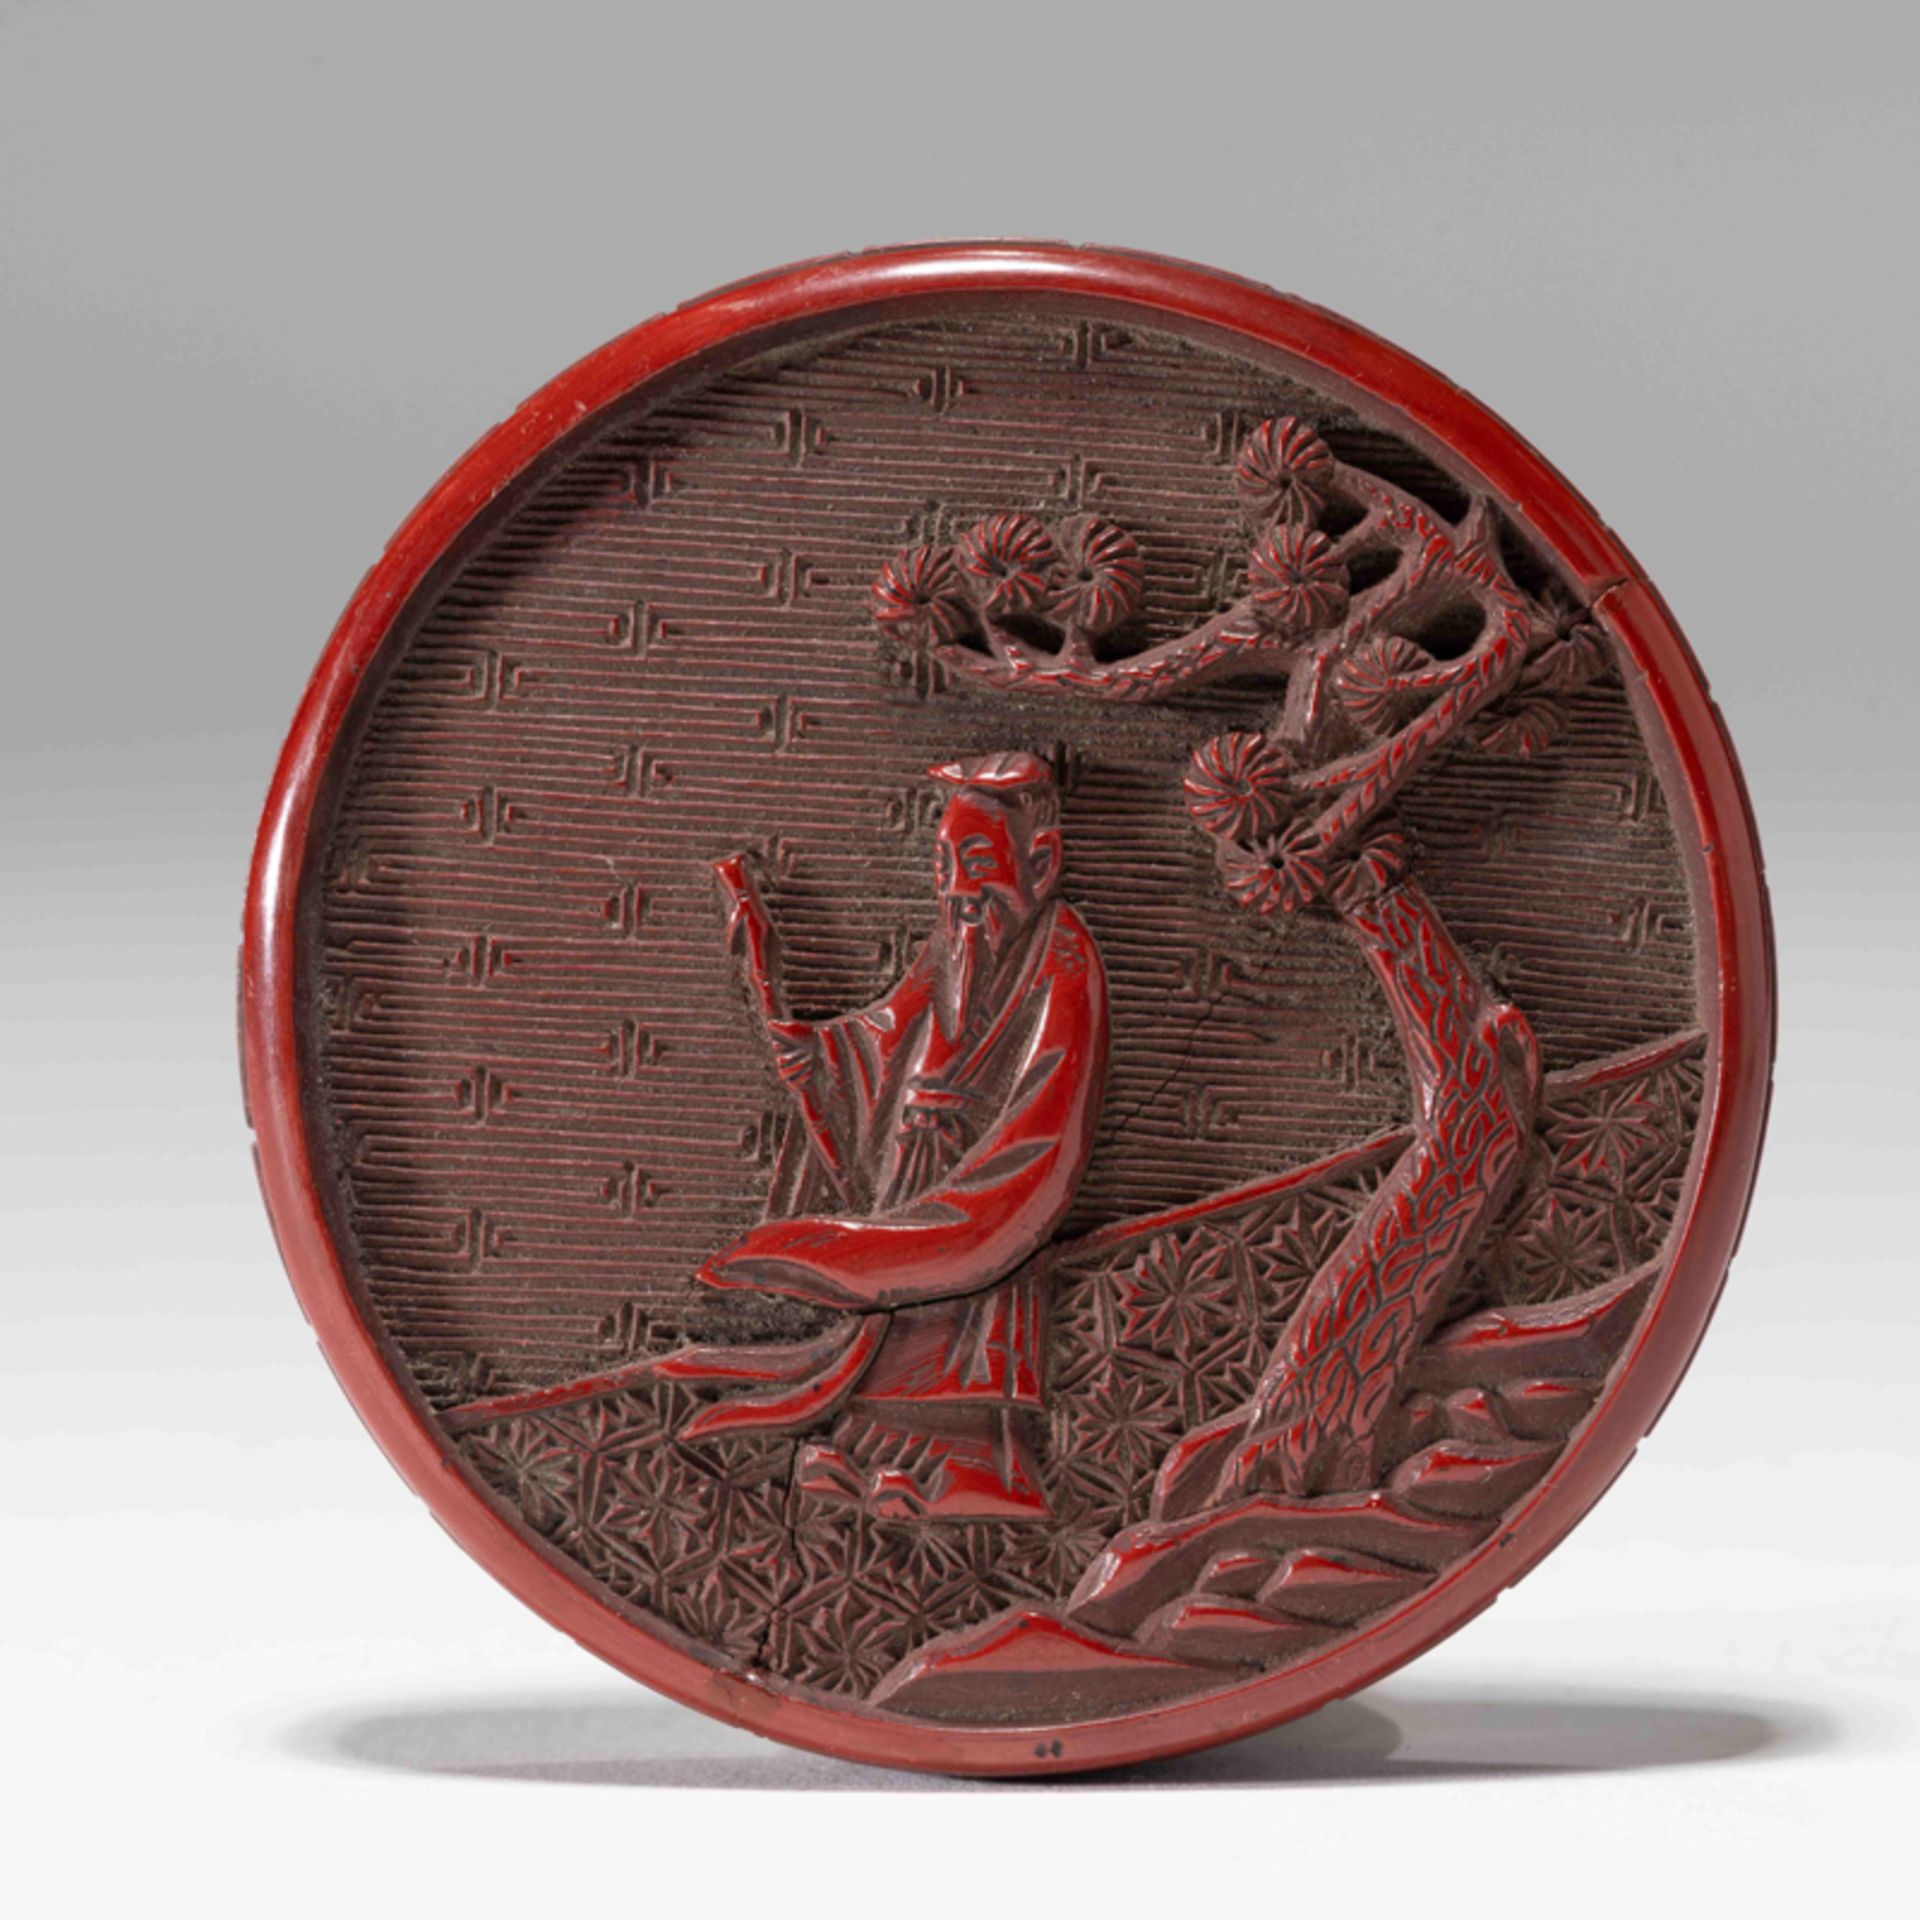 A CHINESE LACQUER 'FIGURE' INCENSE BOX, MING DYNASTY